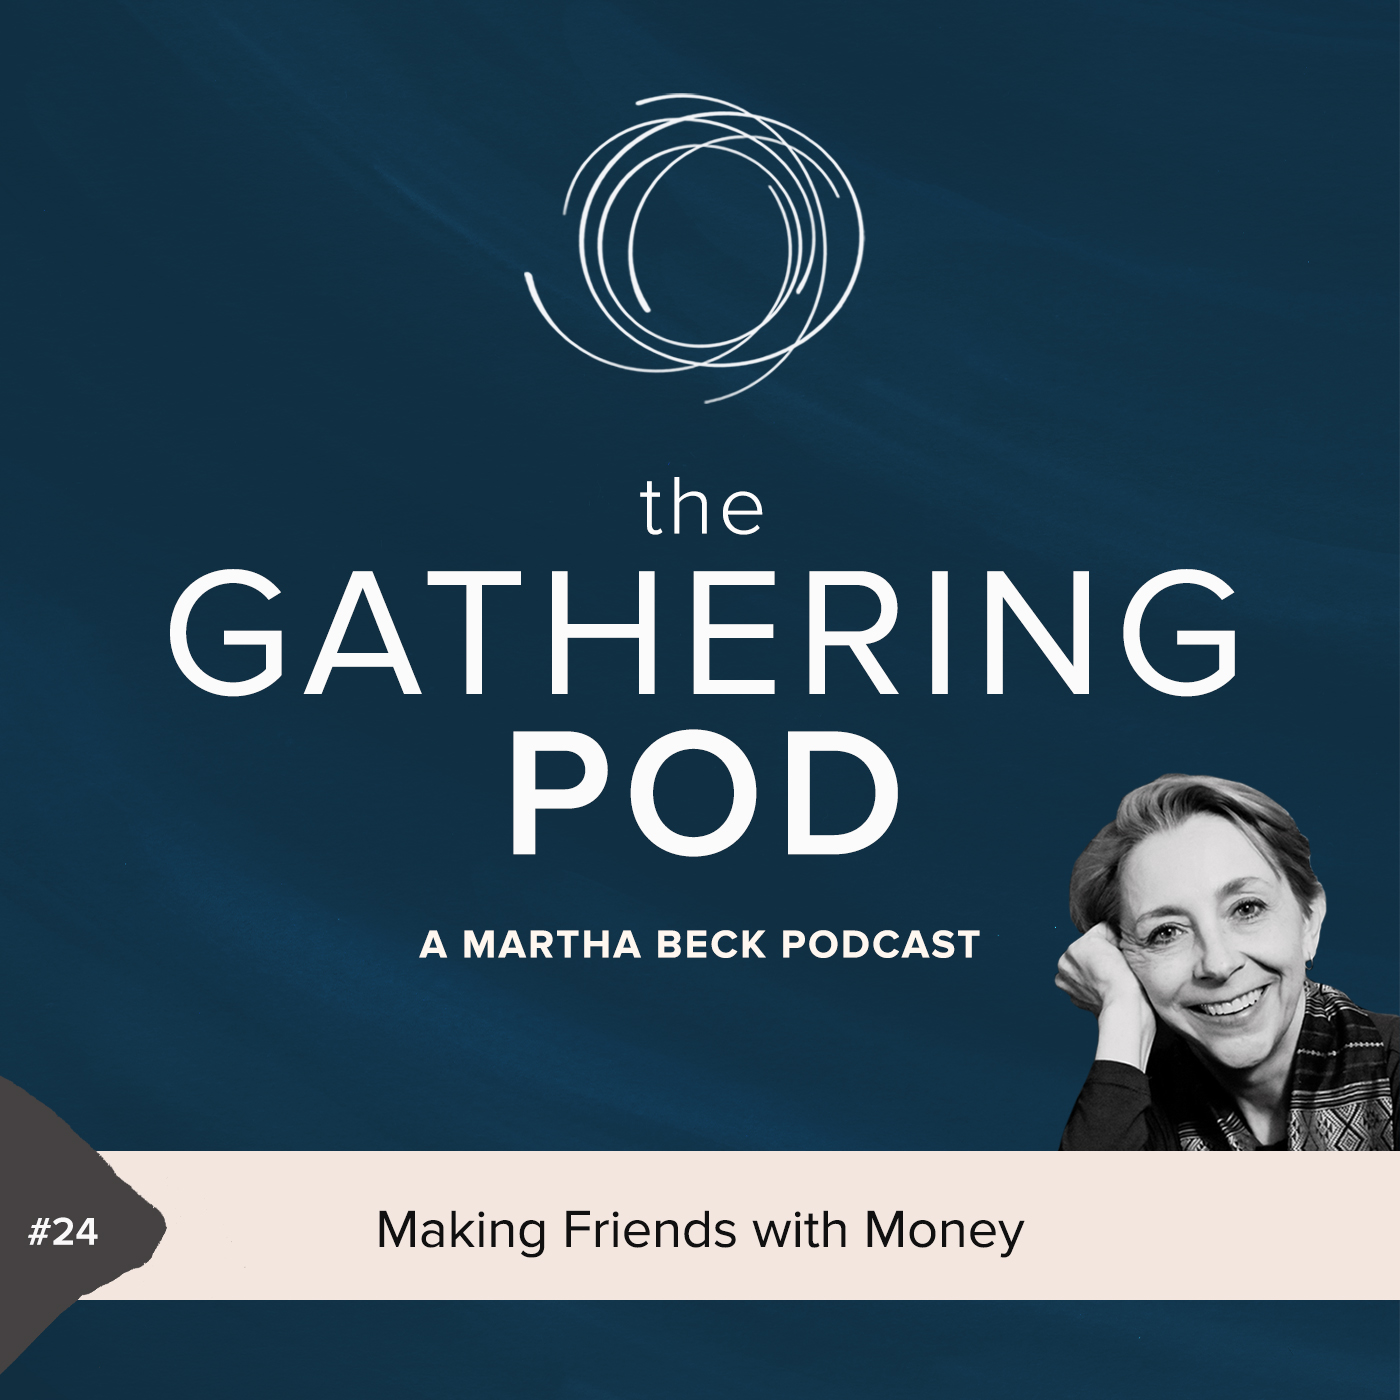 Image for The Gathering Pod A Martha Beck Podcast Episode #24 Making Friends with Money